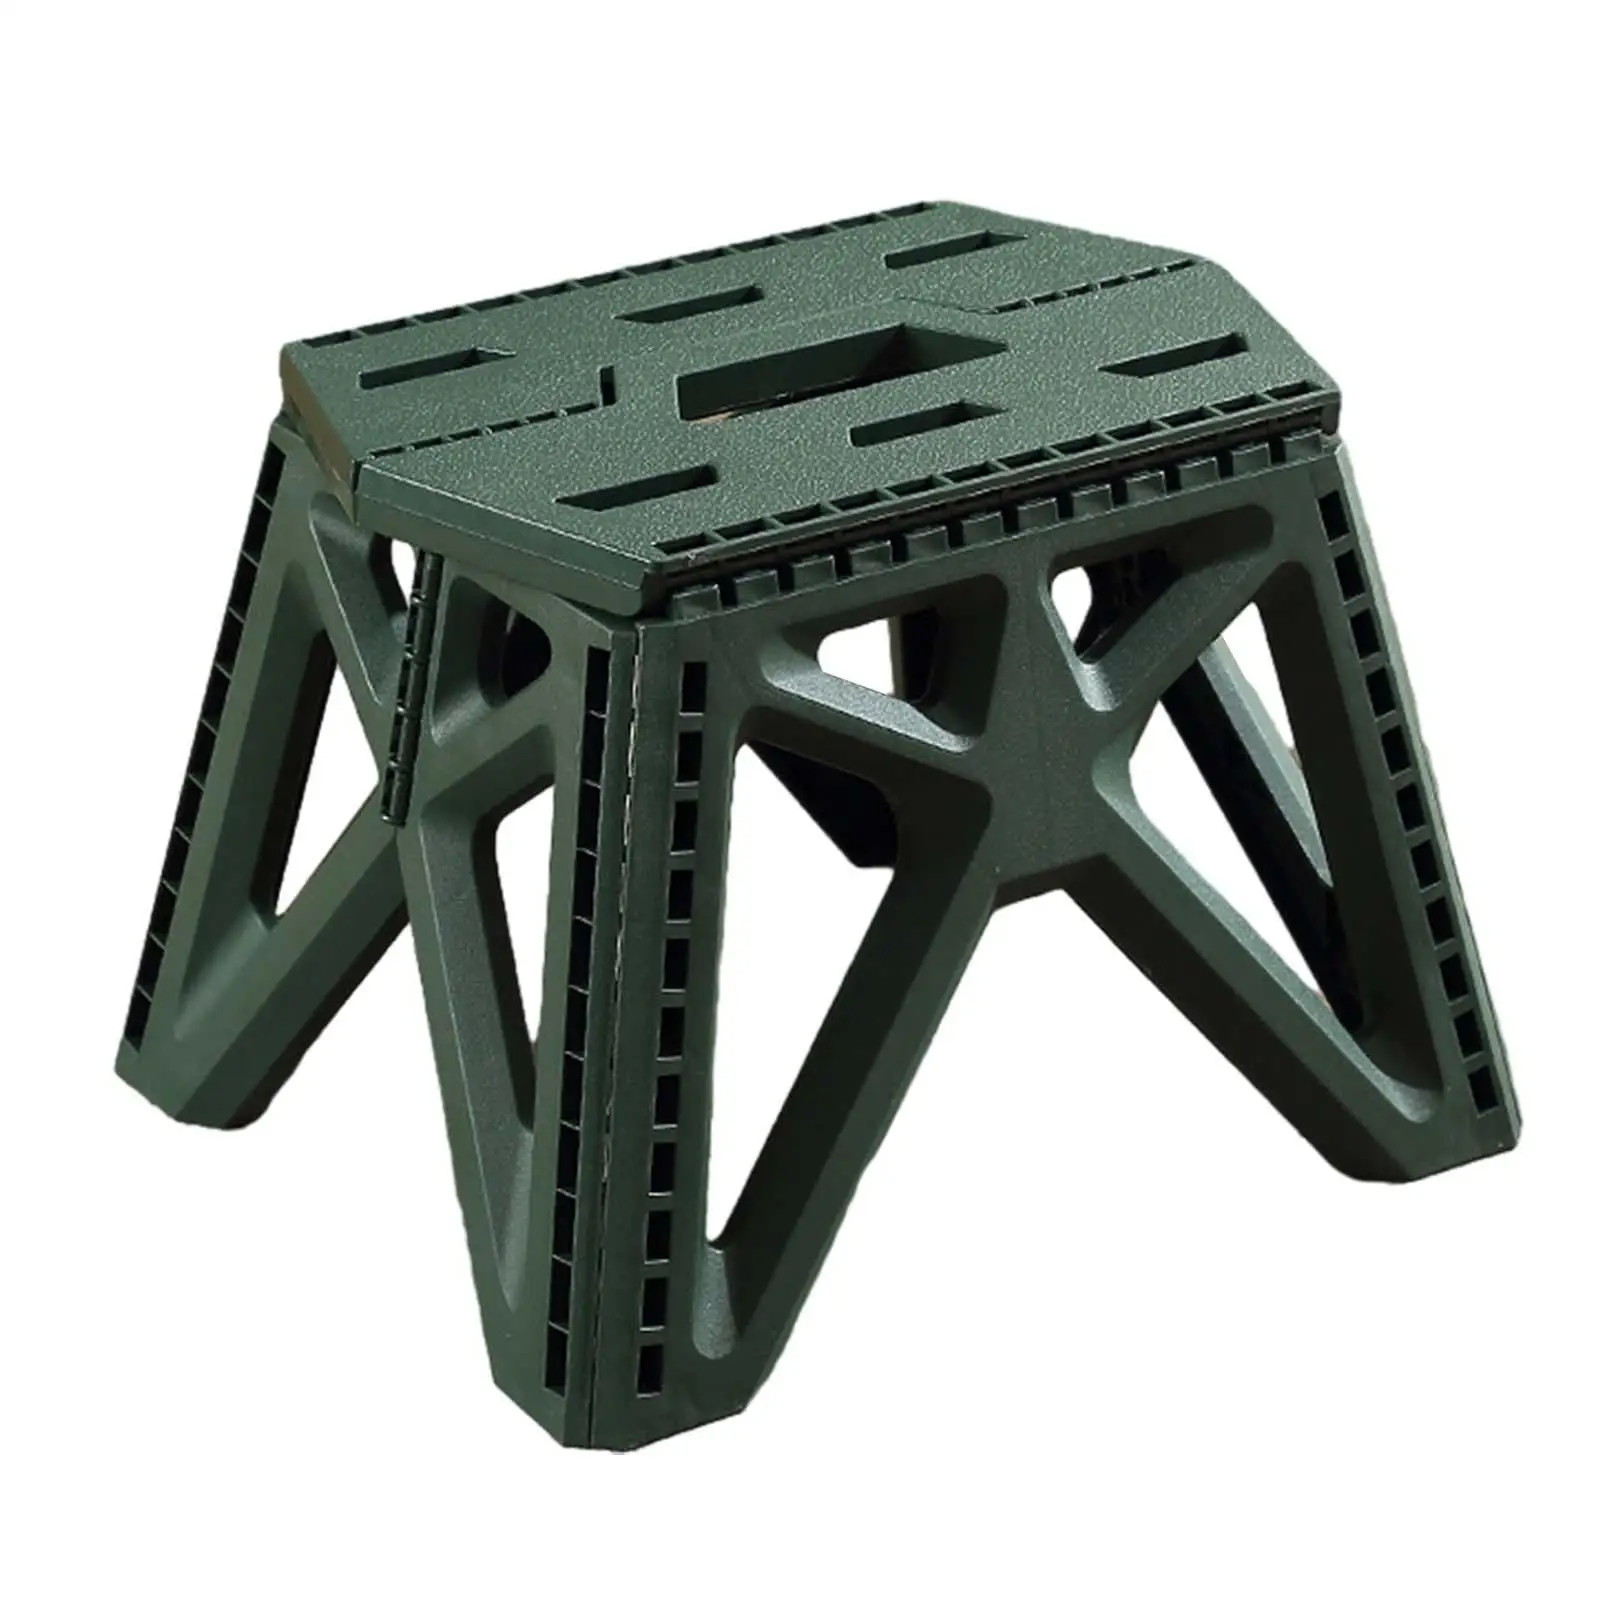 Foldable Camping Stool Lightweight Collapsible Outdoor Foldable Stool Camping Chair for Backpacking Backyard Picnic Patio Yard